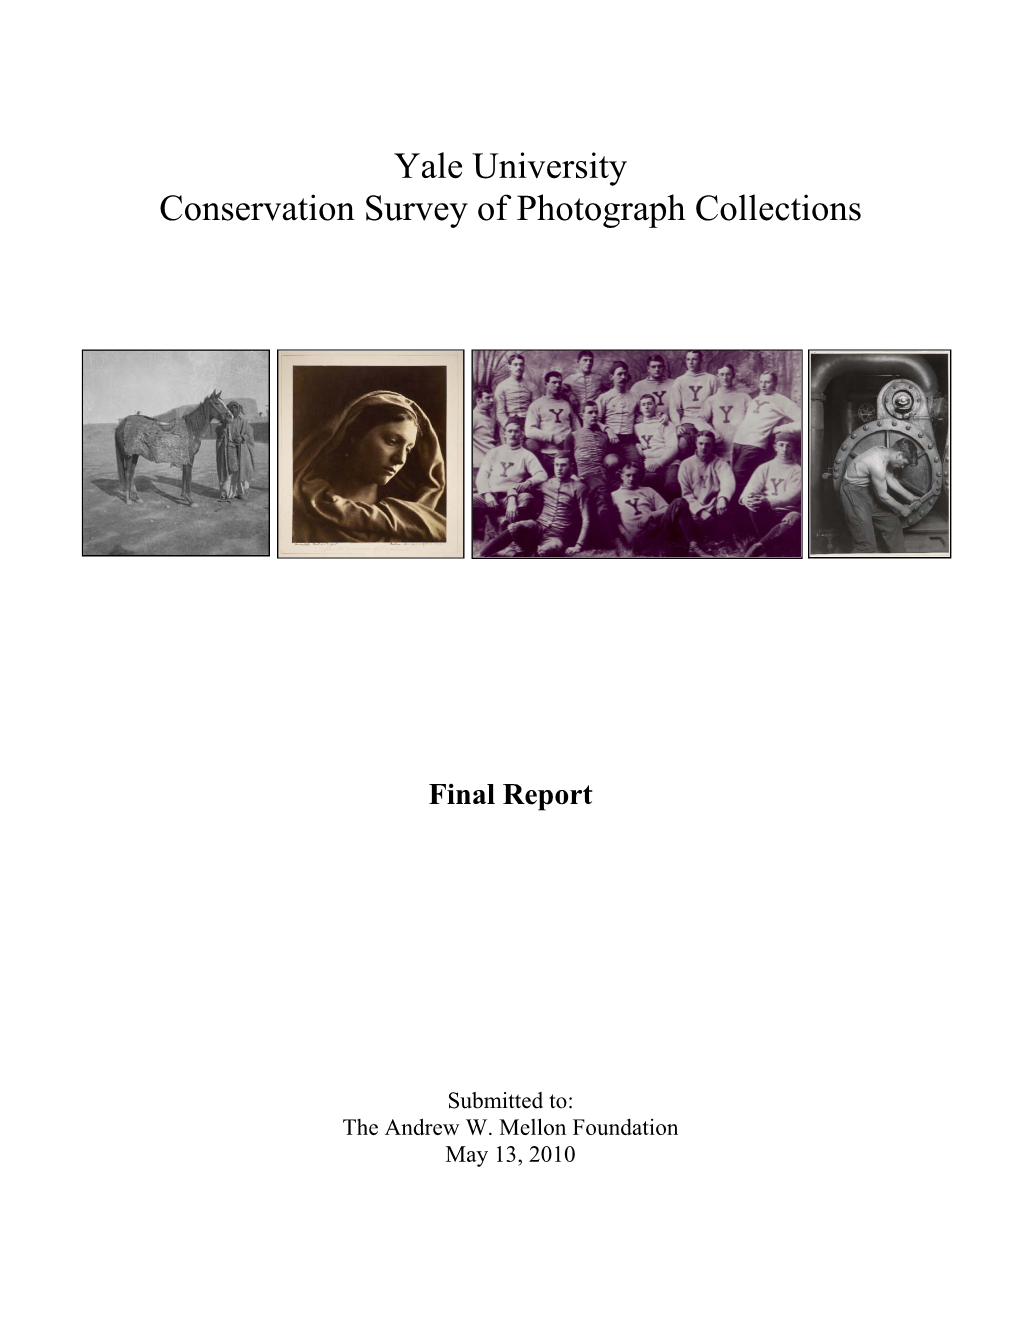 Yale University Conservation Survey of Photograph Collections